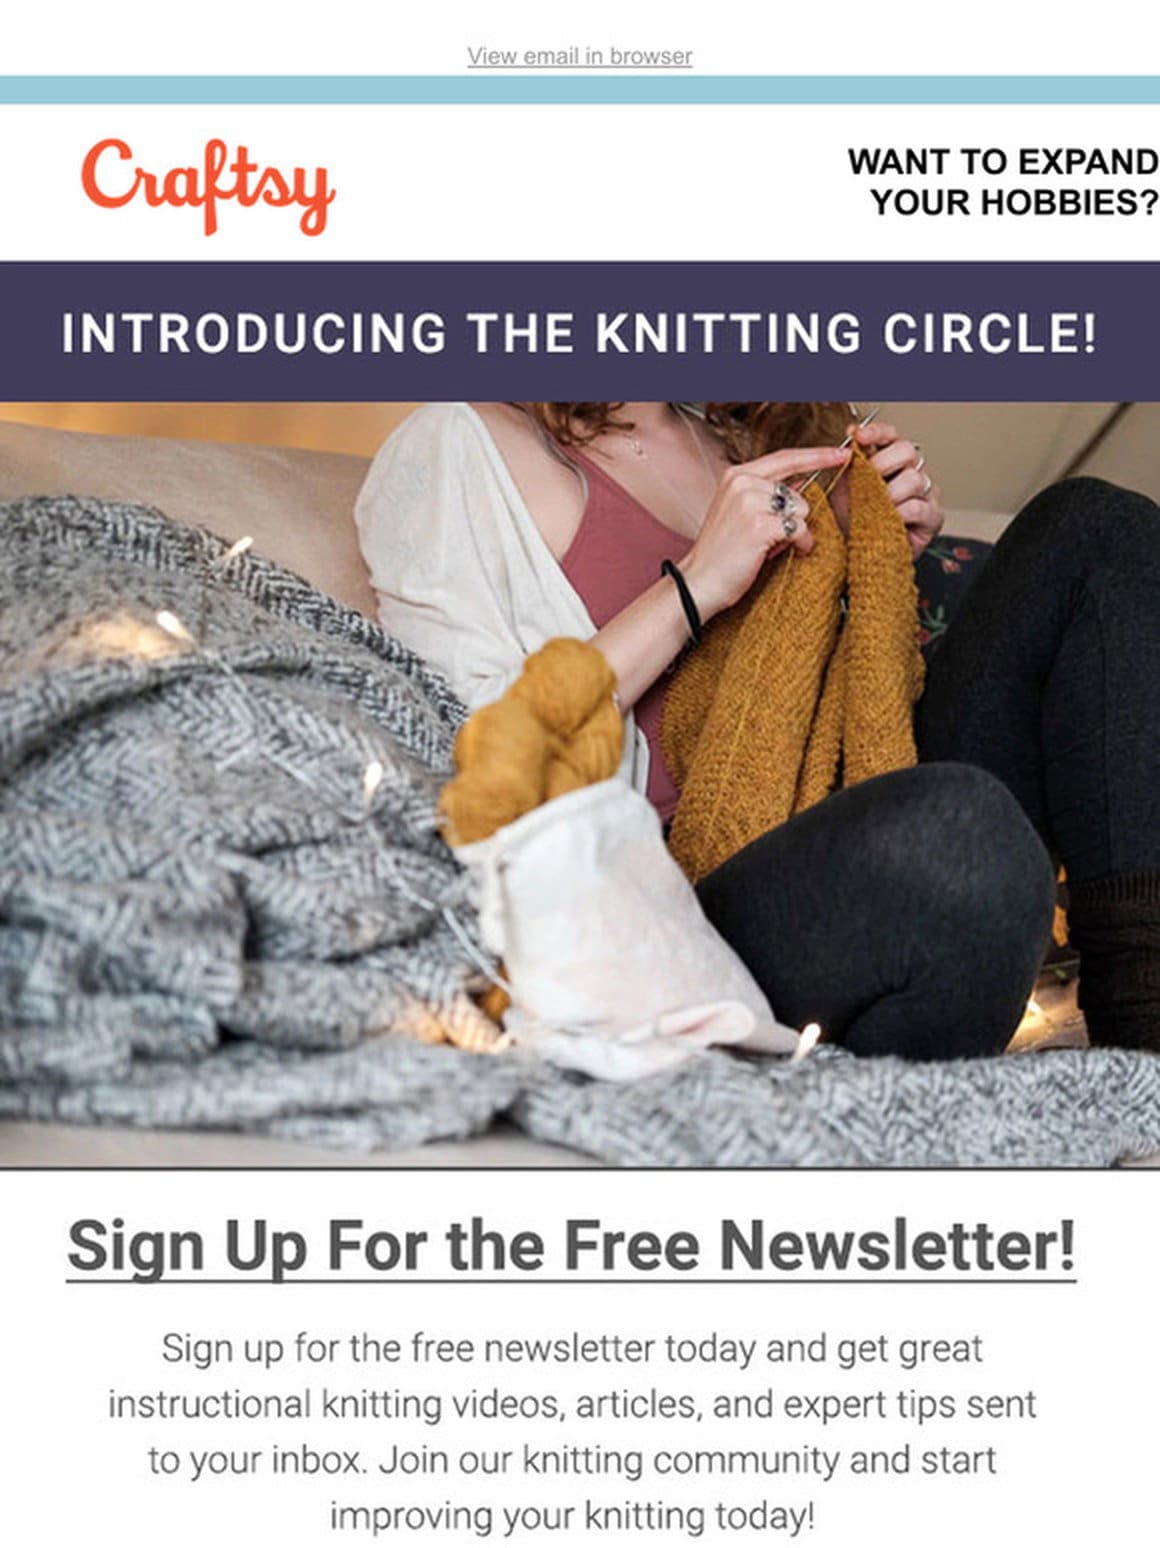 Congrats! You’ve been invited to get FREE knitting videos， tips & projects.